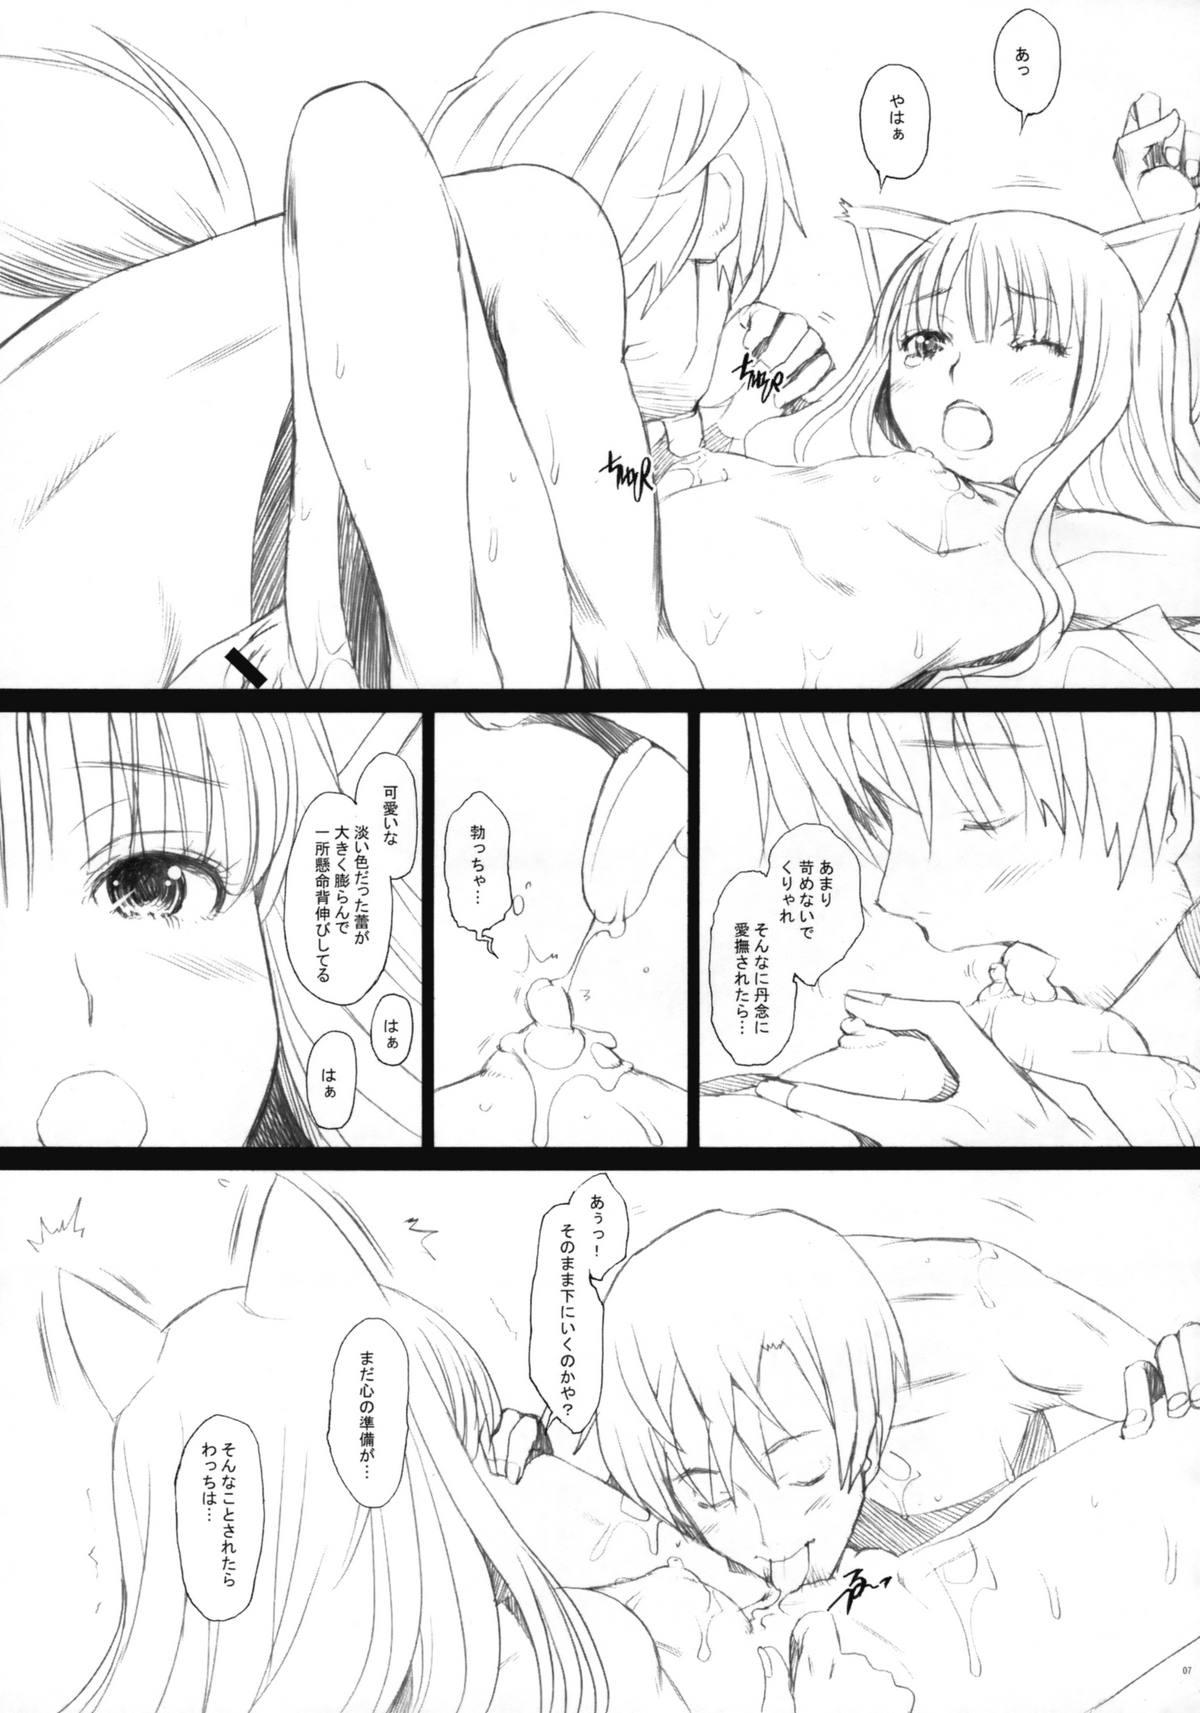 Fisting Ai Ga Horohoro - Spice and wolf Shemale - Page 6